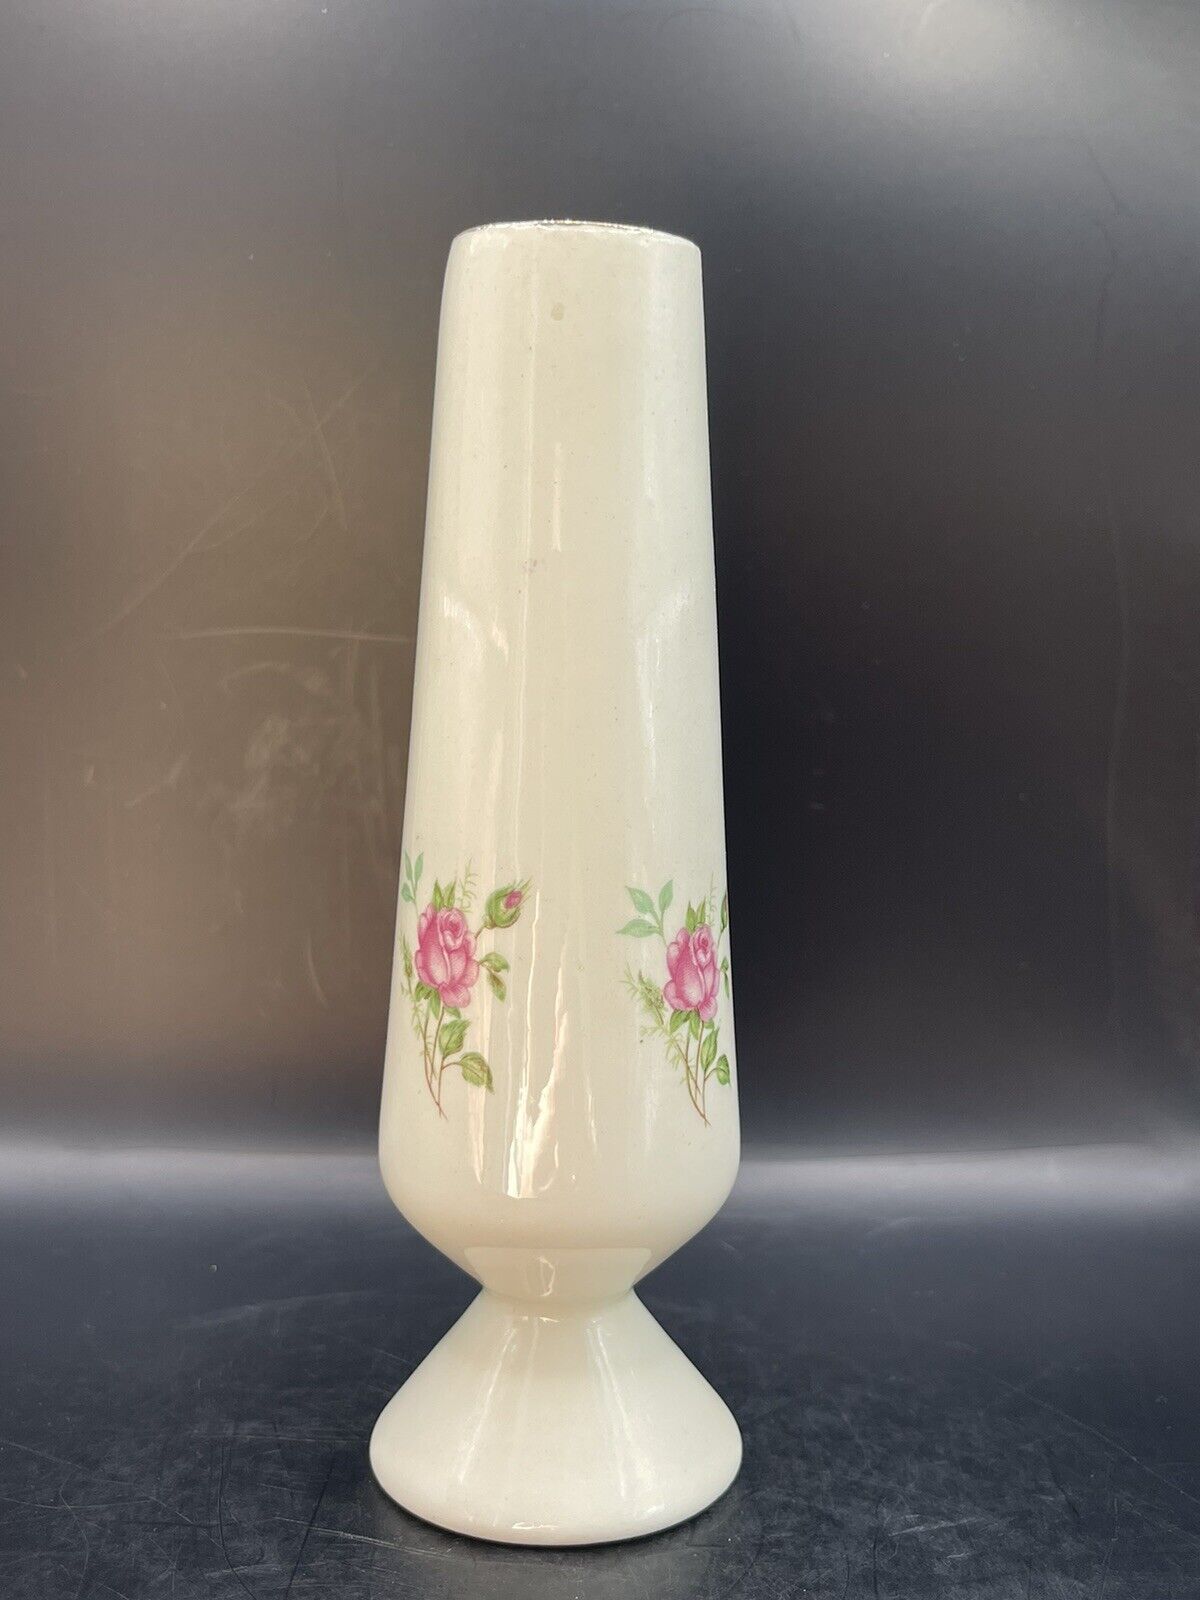 Ceramic Vase with Flowers Gold Trim 6” Tall